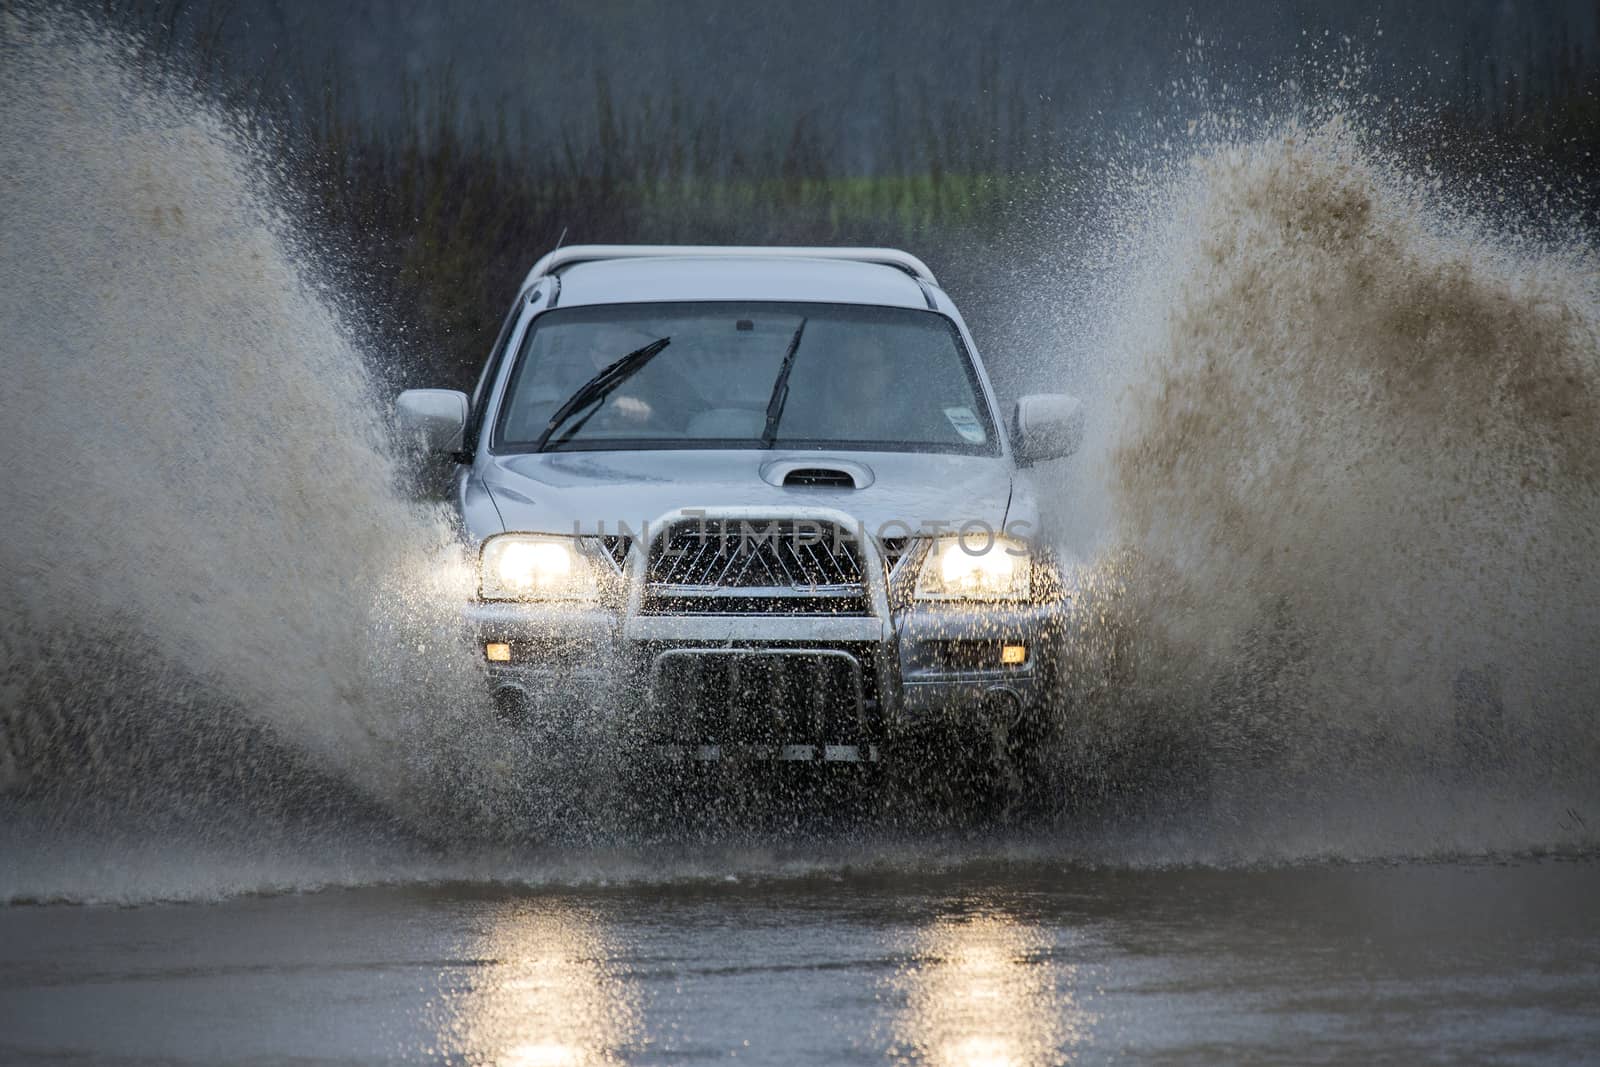 Driving through floodwater on a country road in North Yorkshire in the United Kingdom.